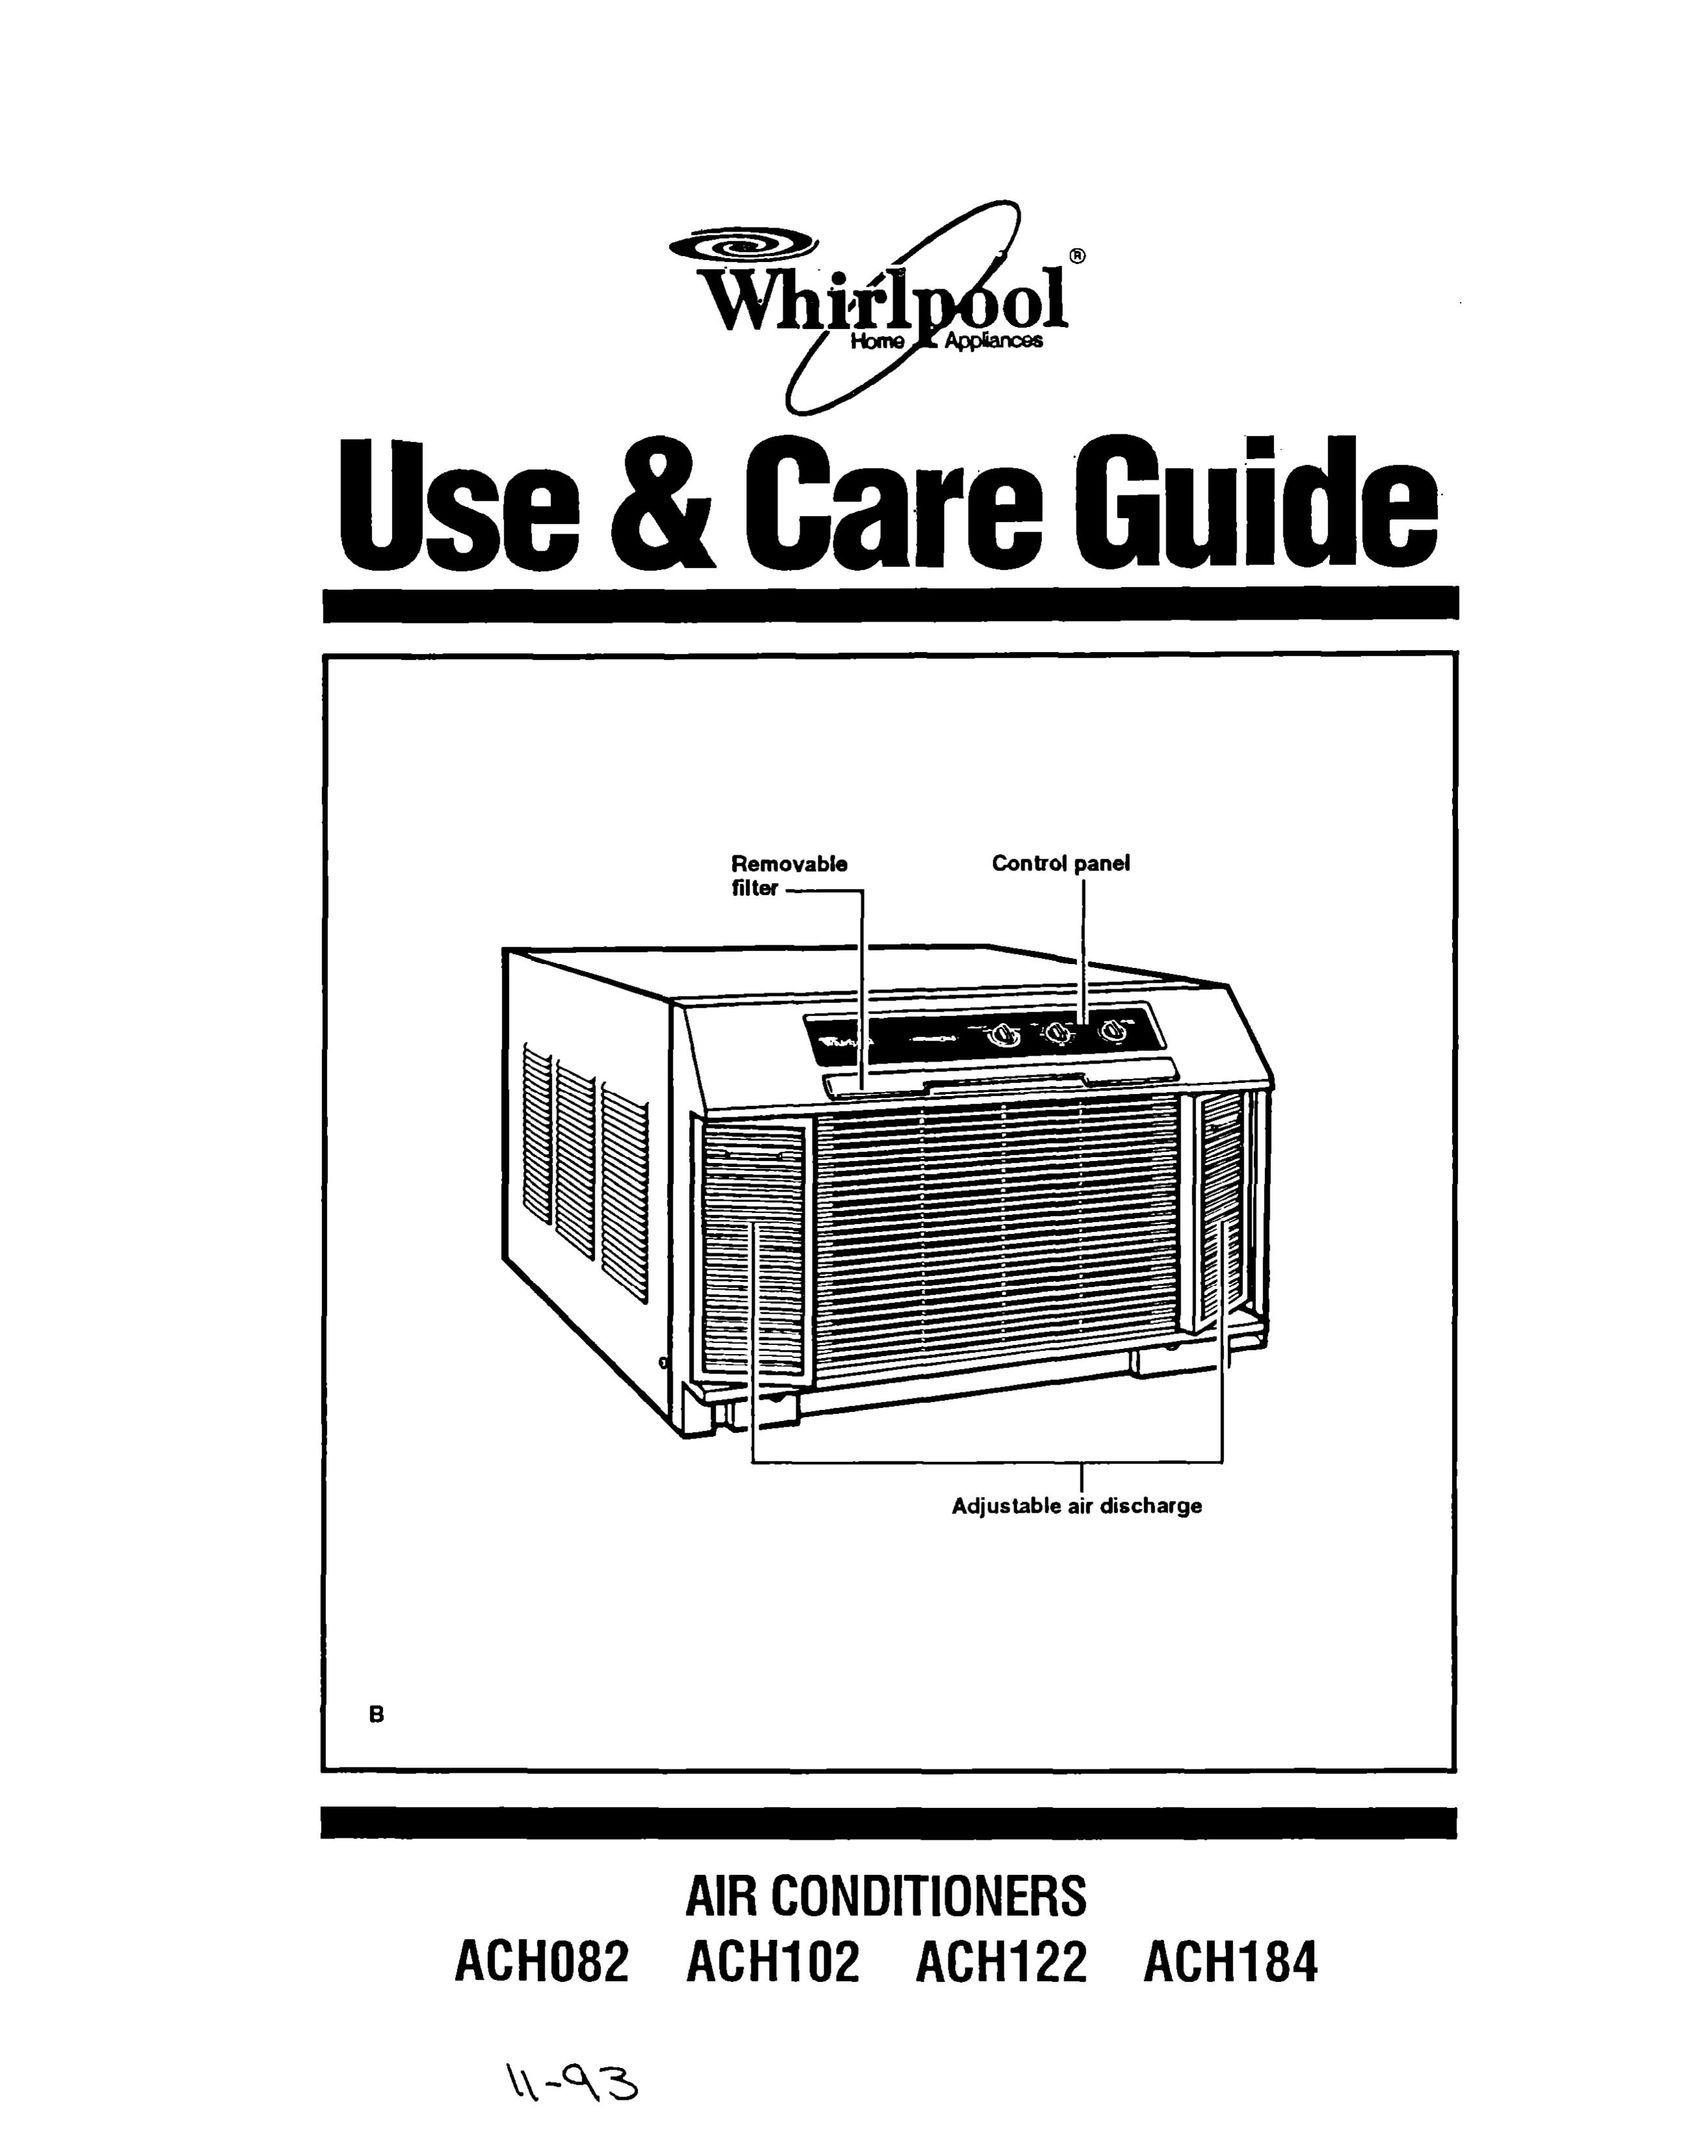 Whirlpool ACH082 Air Conditioner User Manual